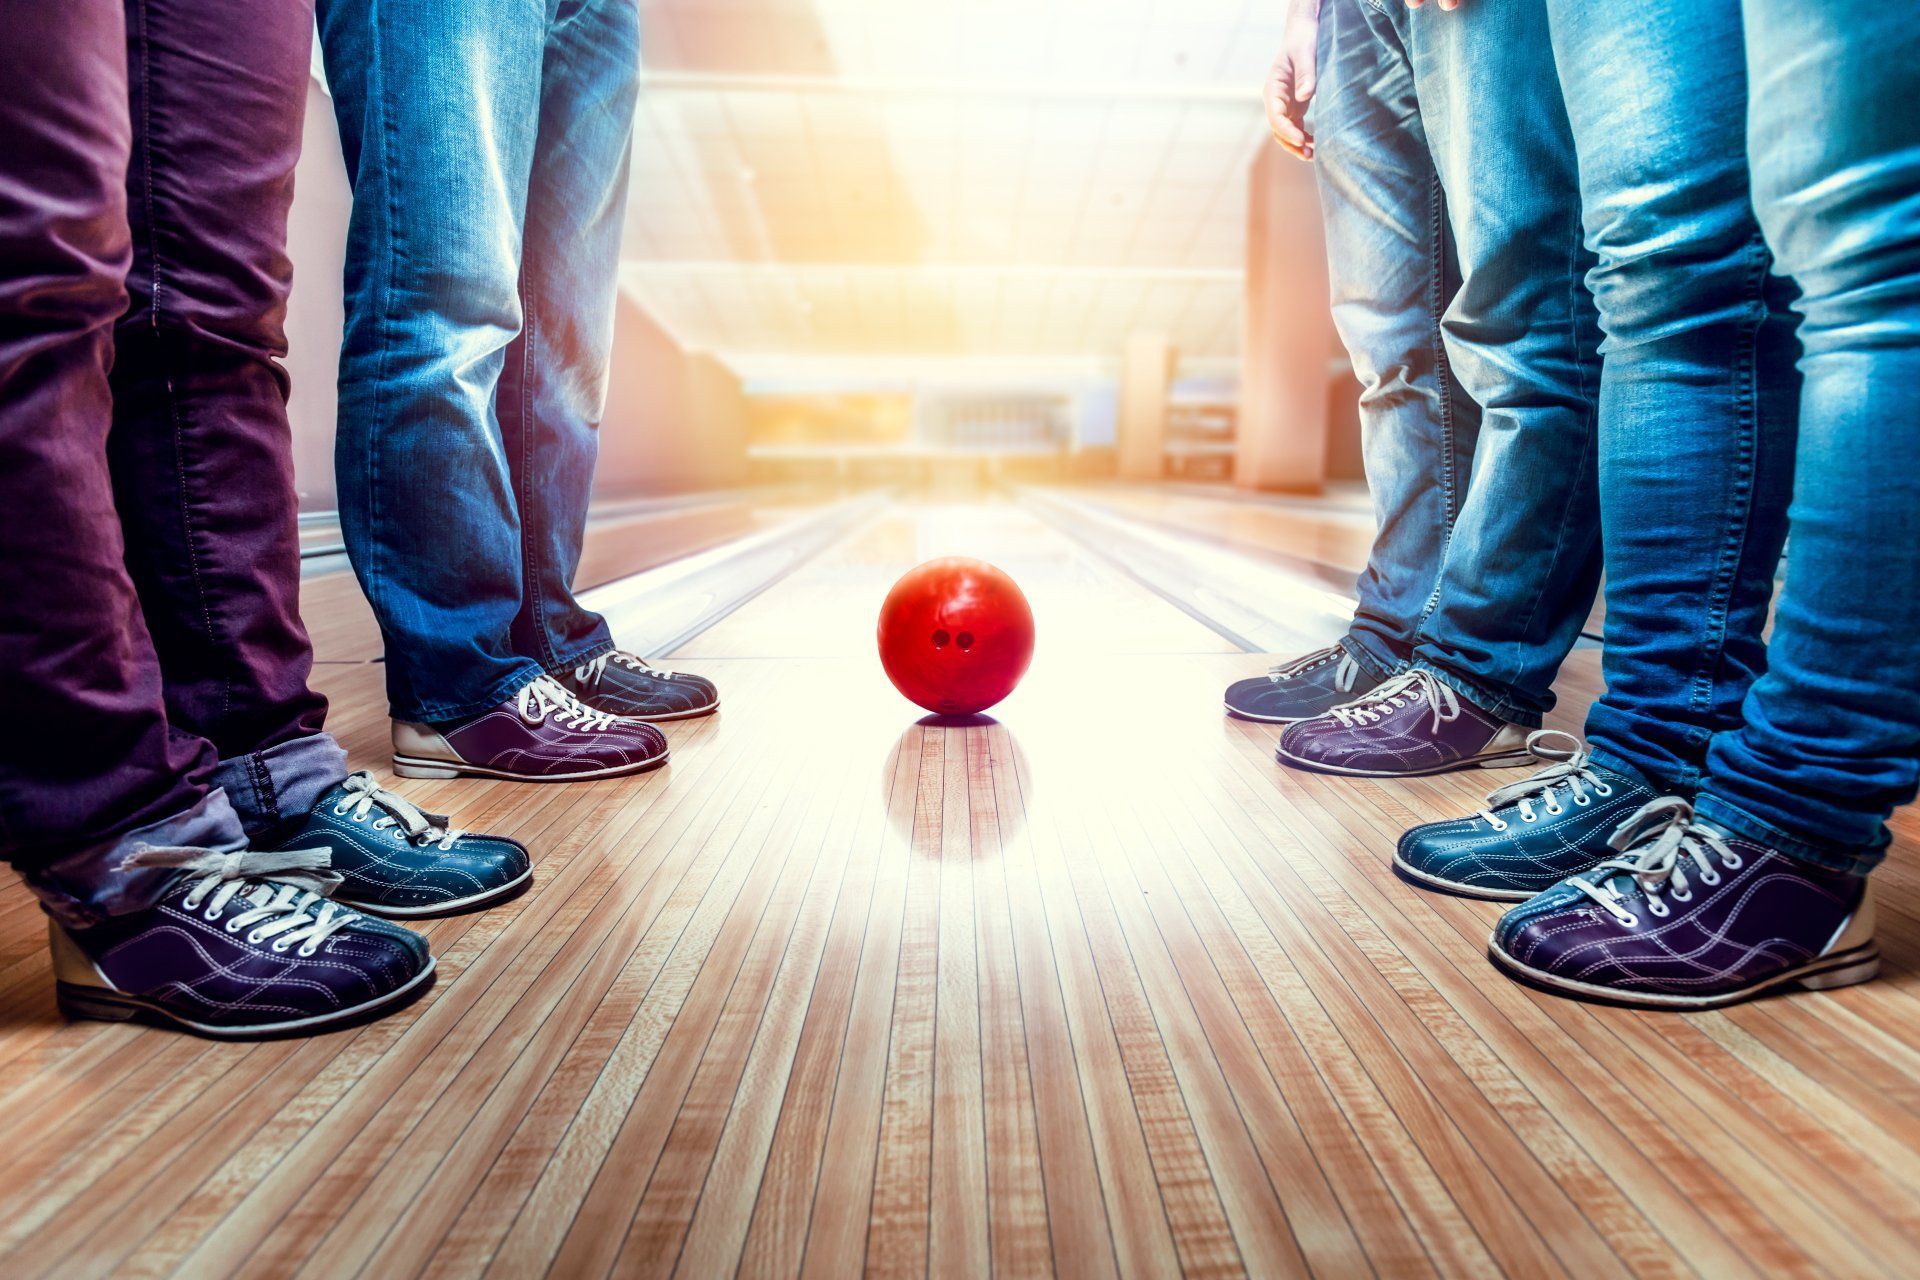 Summer Bowling Leagues Forming